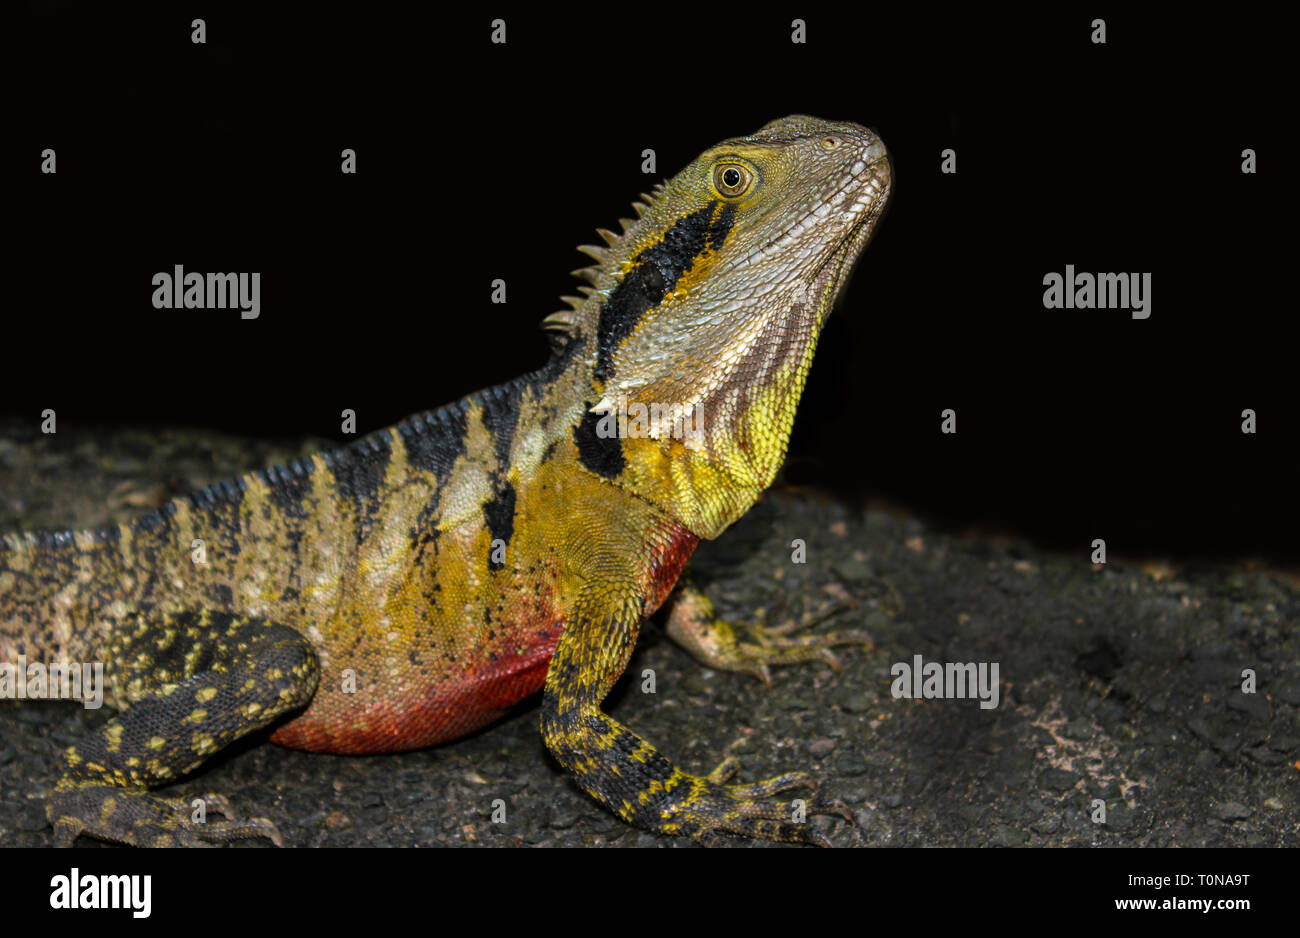 iguana lizard looking out in rainforest asutralia, reptile portrait isolated on black Stock Photo